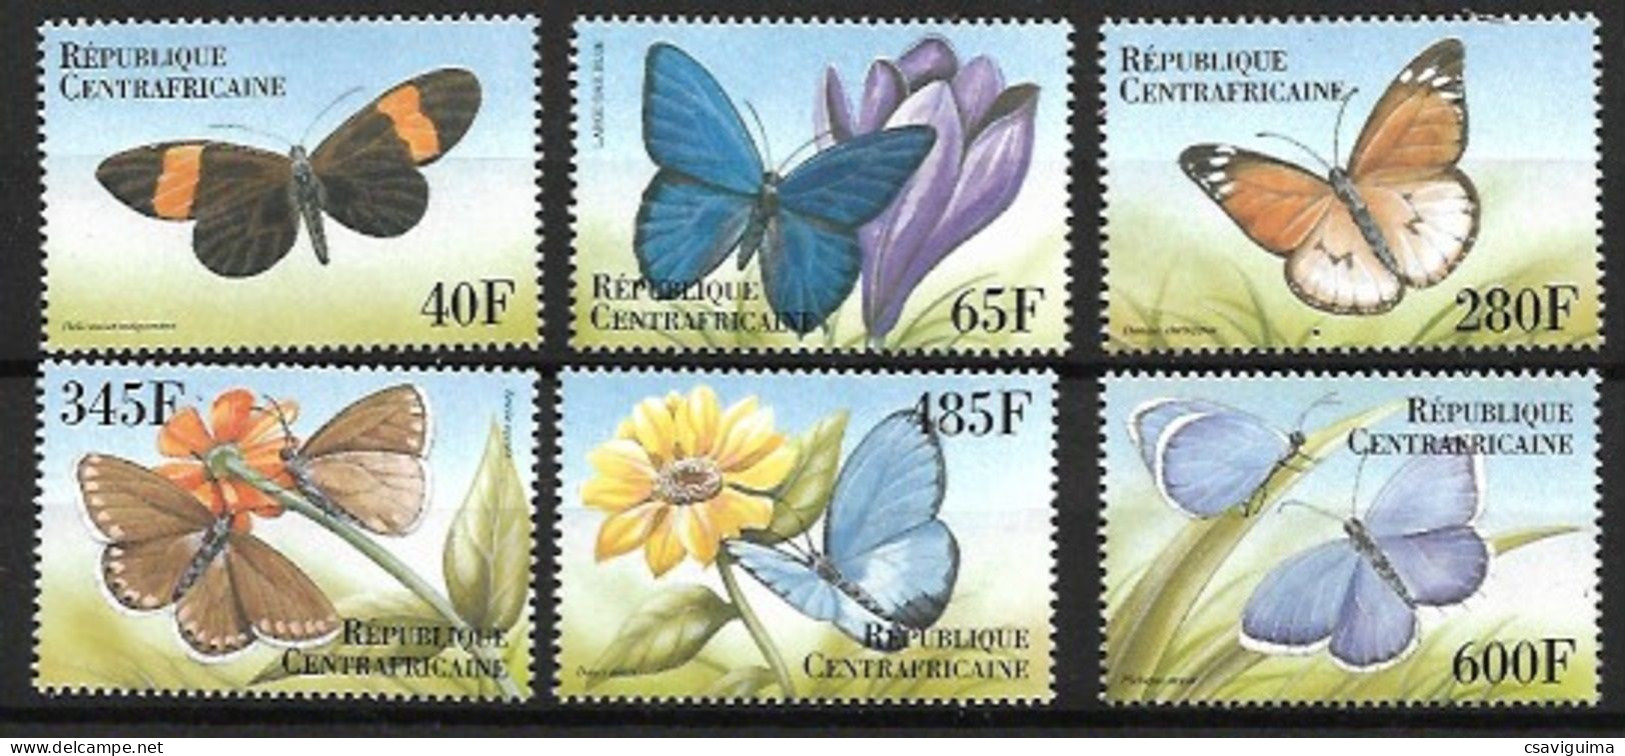 Central Africa Rep. (Centrafricaine) - 2000 - Butterflies - Yv 1618CS/CY - Papillons